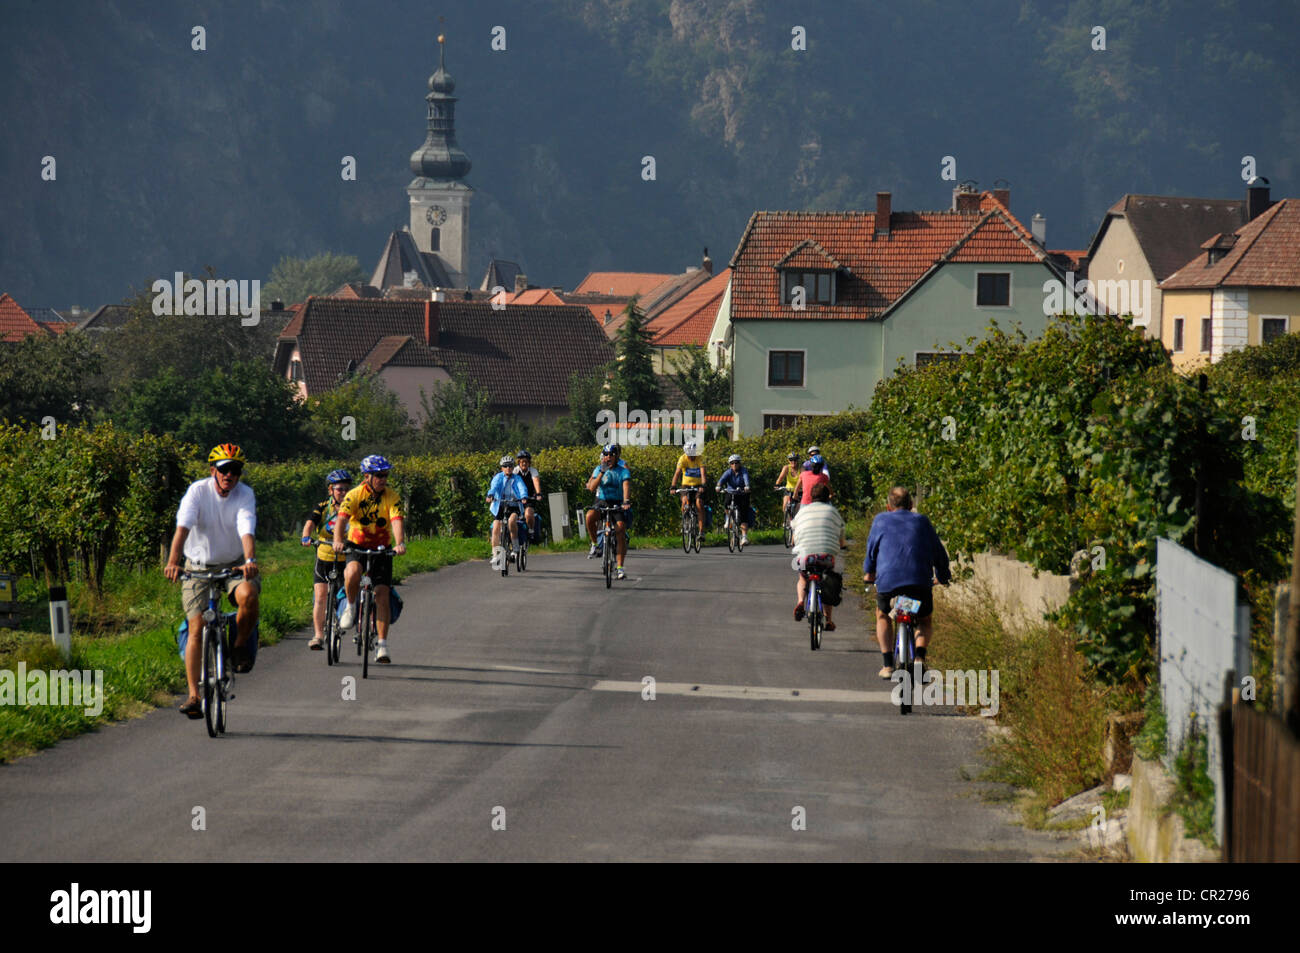 A group of cyclists on a cycling tour leaving Unterloiben village in the Wachau valley in Lower Austria, Austria Stock Photo